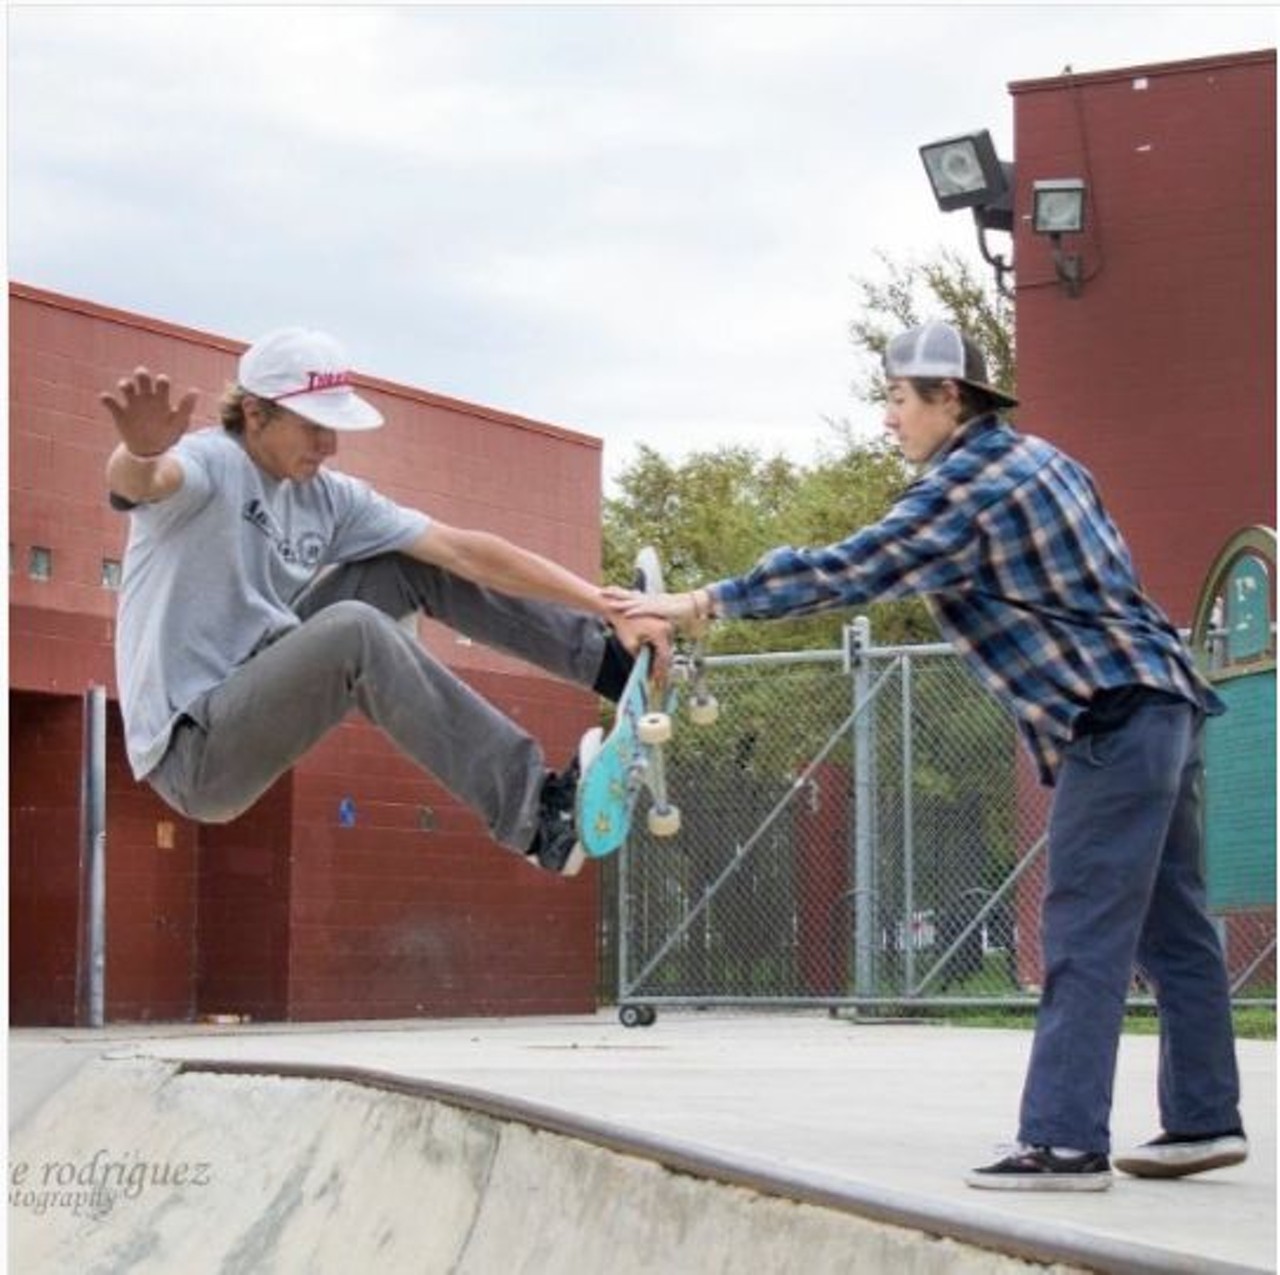 Skateparks
Multiple locations, (210) 599-0122, 
sanantonio.gov/ParksAndRec
With multiple locations to choose from, you can rip it up at a local skate parks for free. Be safe and have fun. 
Photo via Instagram
andrew_martinii
